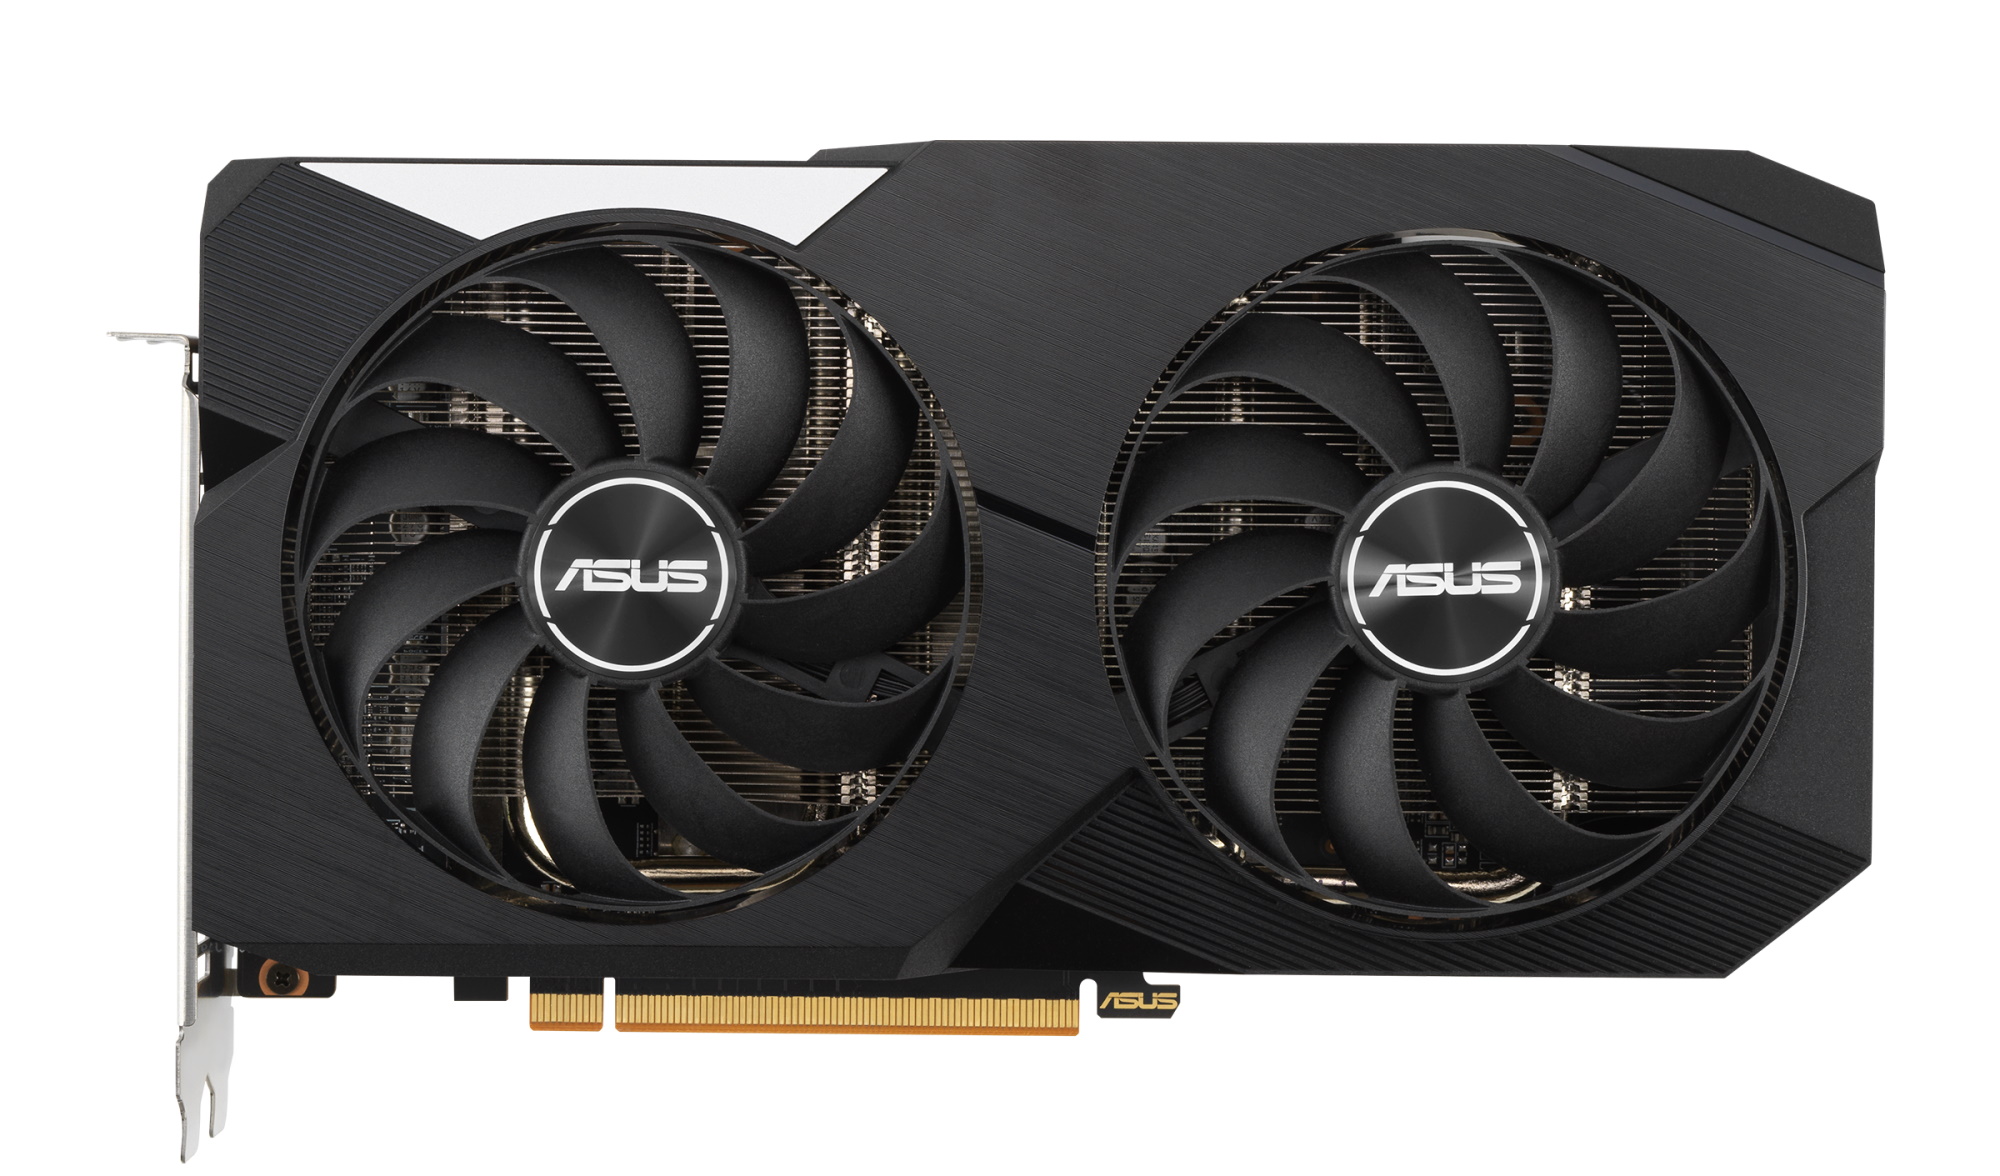 AMD's Radeon RX 6600 is a $329 GPU for 1080p gaming